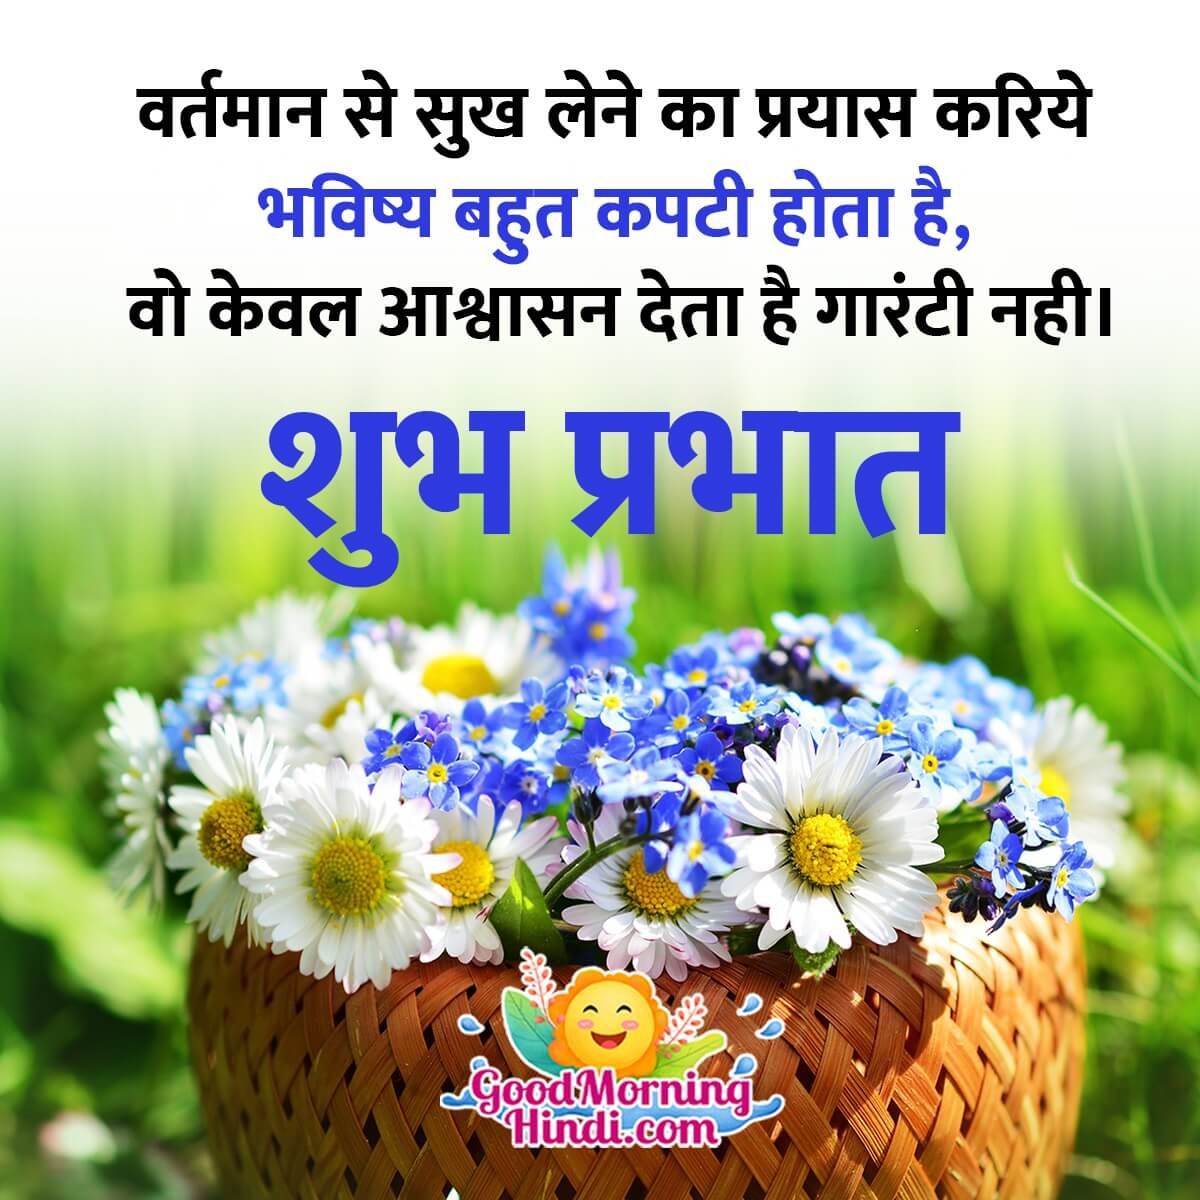 Top 999+ good morning hindi quotes images – Amazing Collection good morning hindi quotes images Full 4K